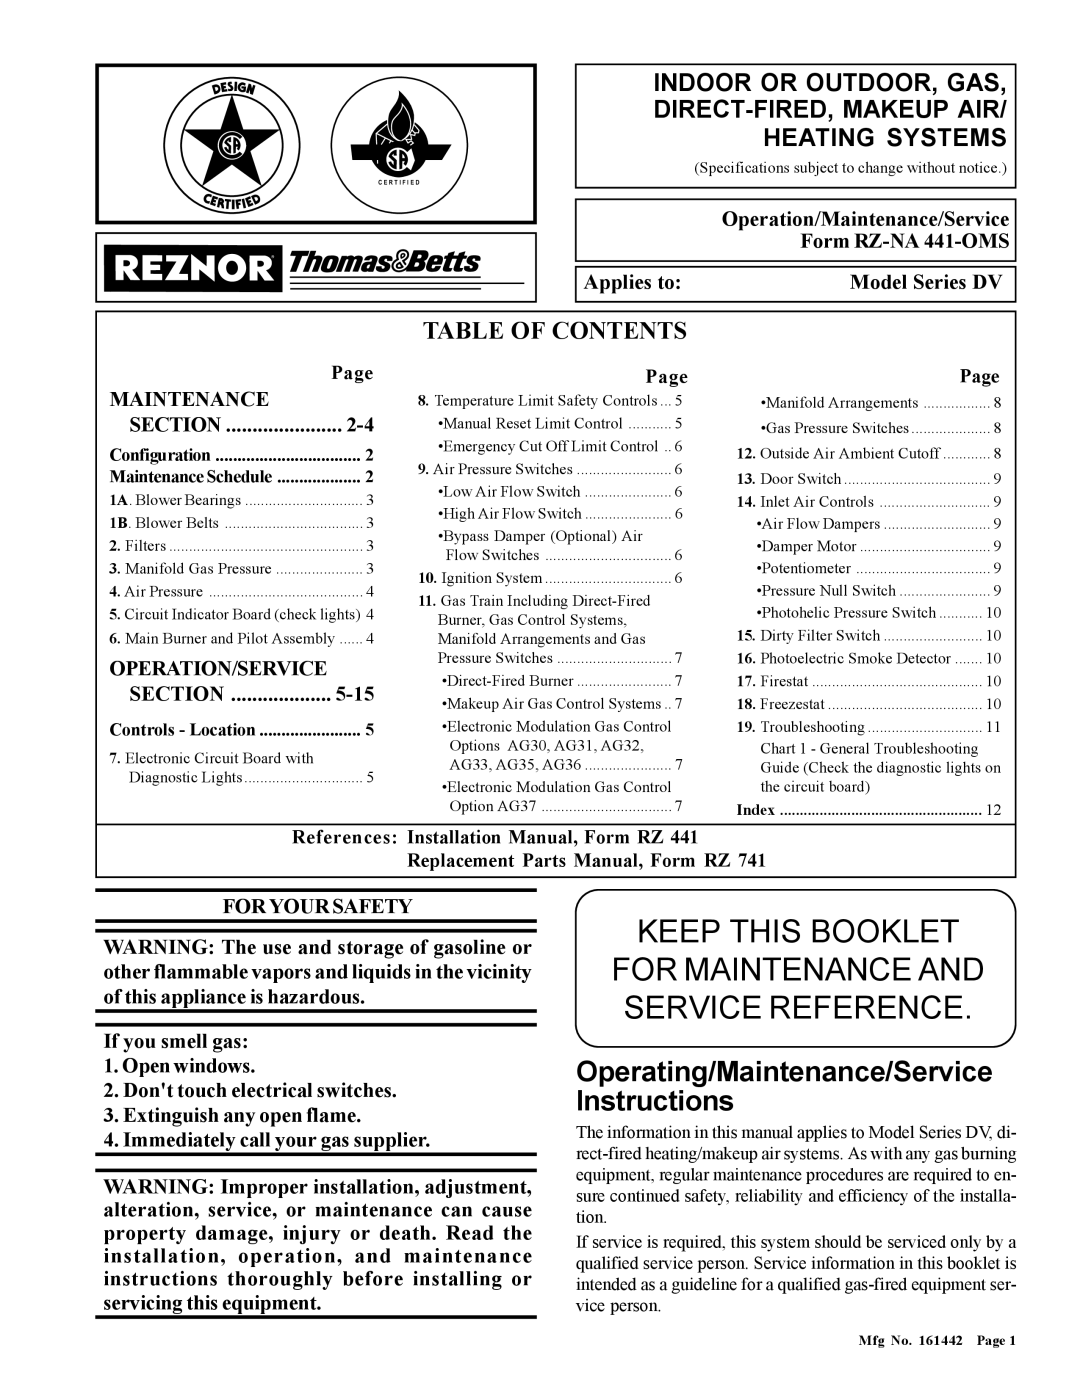 Thomas & Betts RZ-NA 441-OMS installation manual Operating/Maintenance/Service Instructions, Table Of Contents 